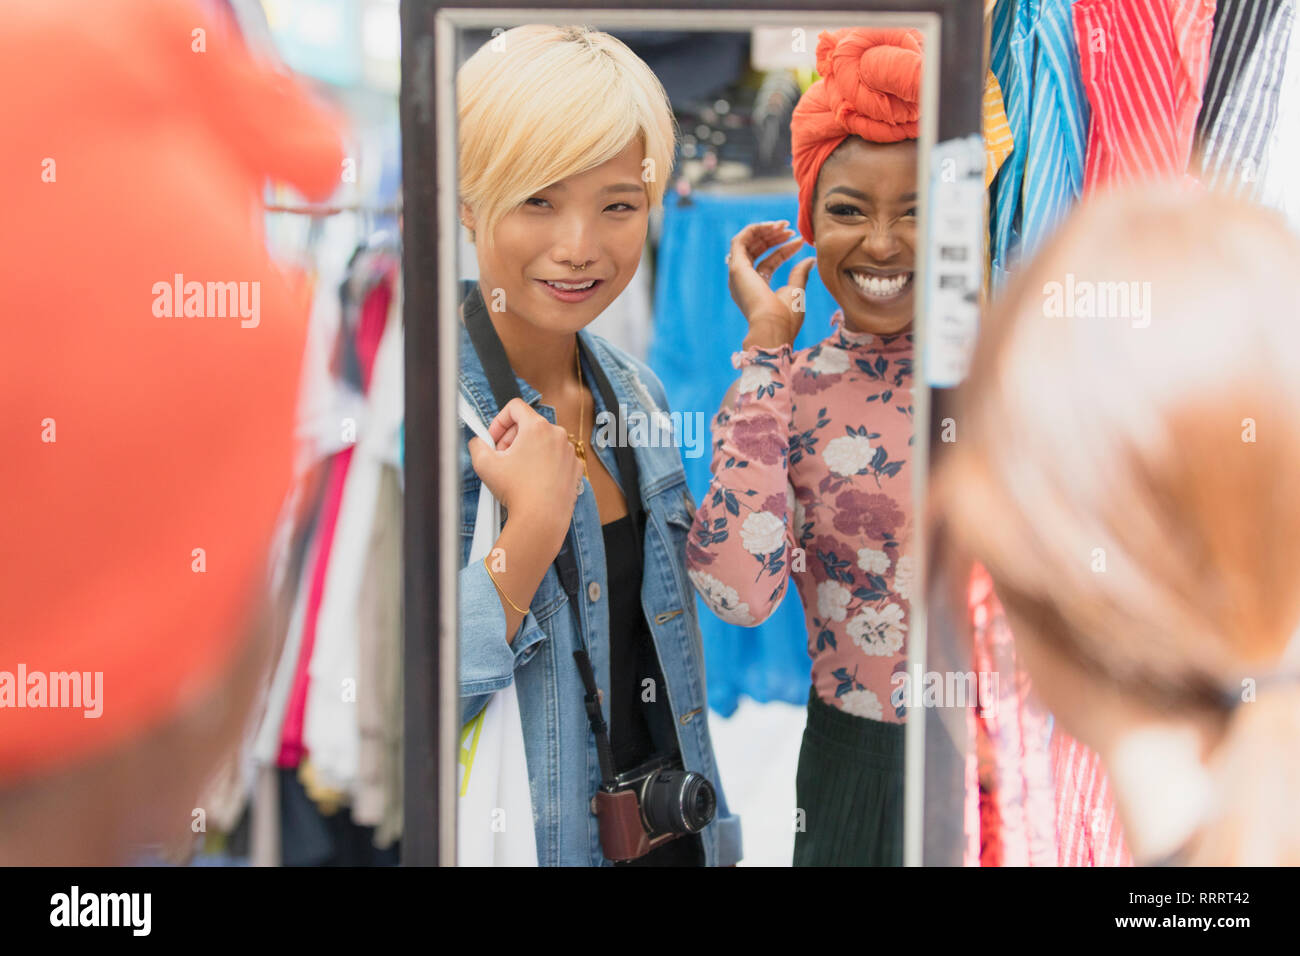 Young women friends shopping at mirror in clothing store Stock Photo